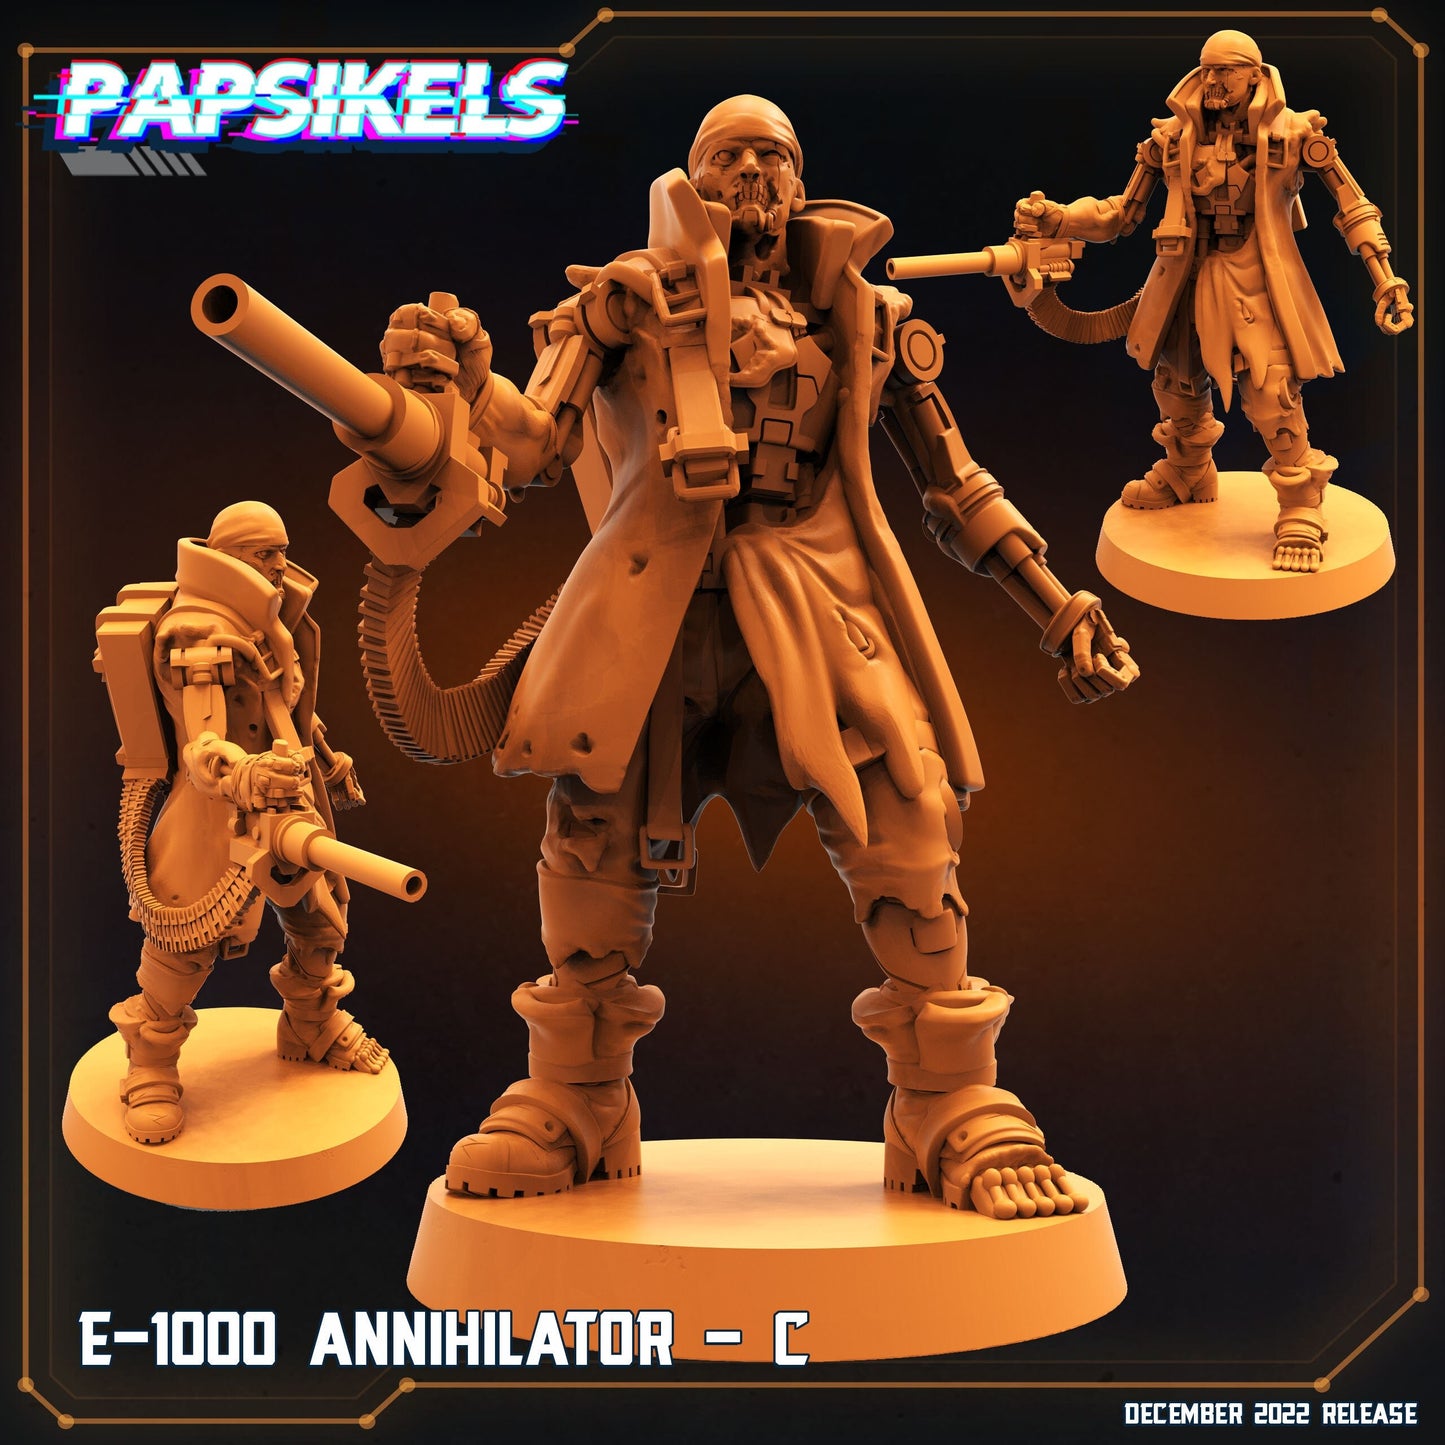 E-1000 Annihilator C - Ex Terminator (sculpted by Papsikels)